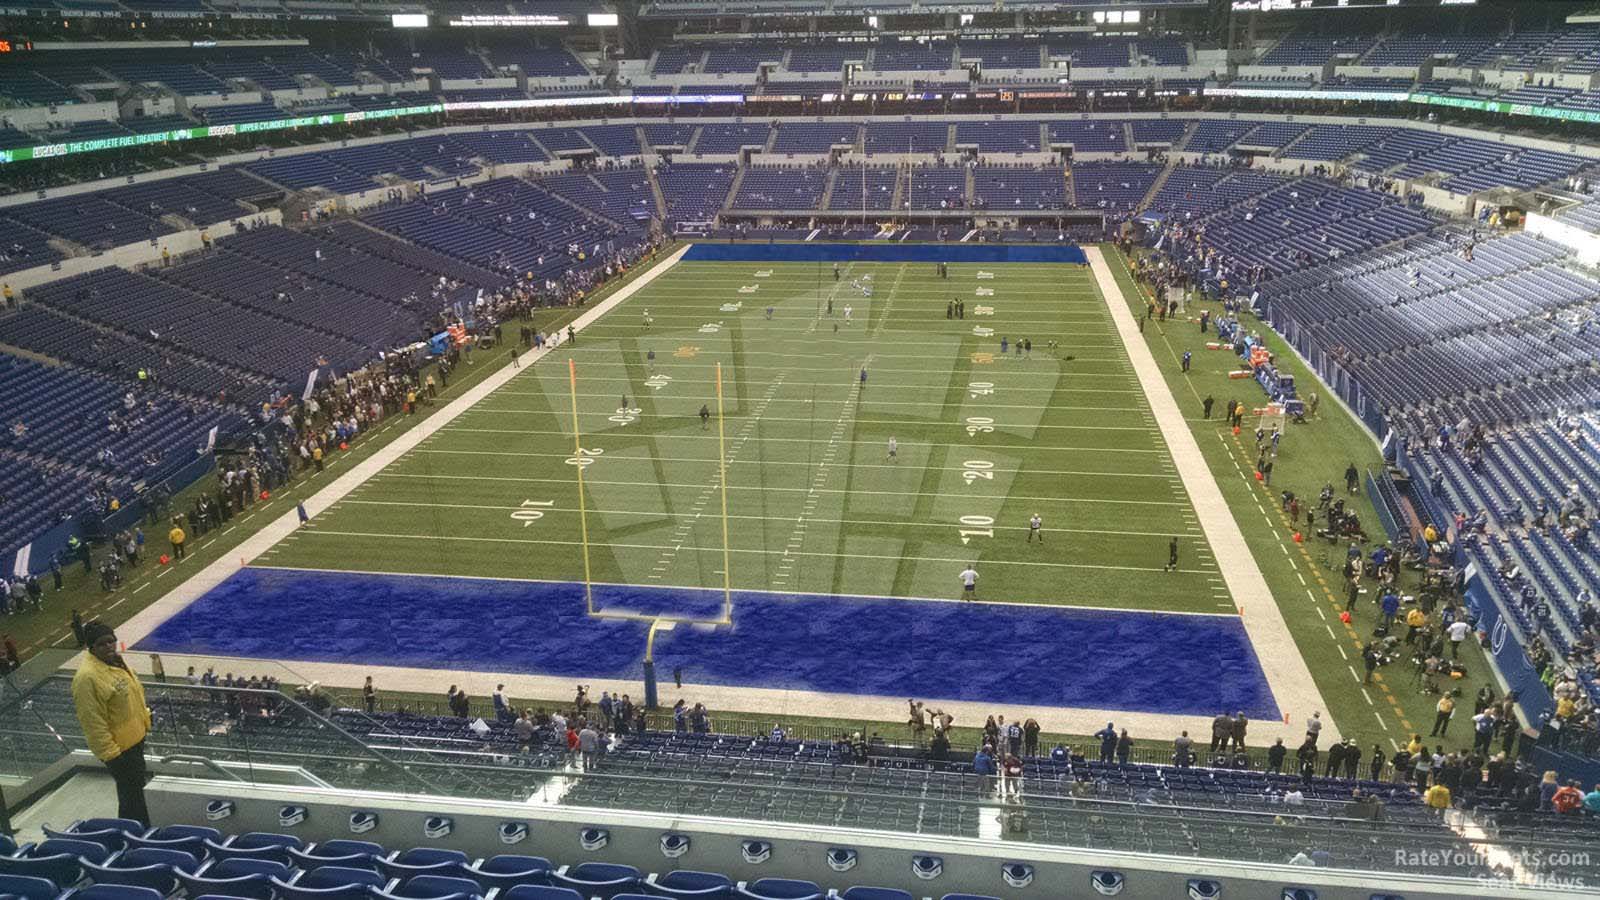 section 452, row 8 seat view  for football - lucas oil stadium